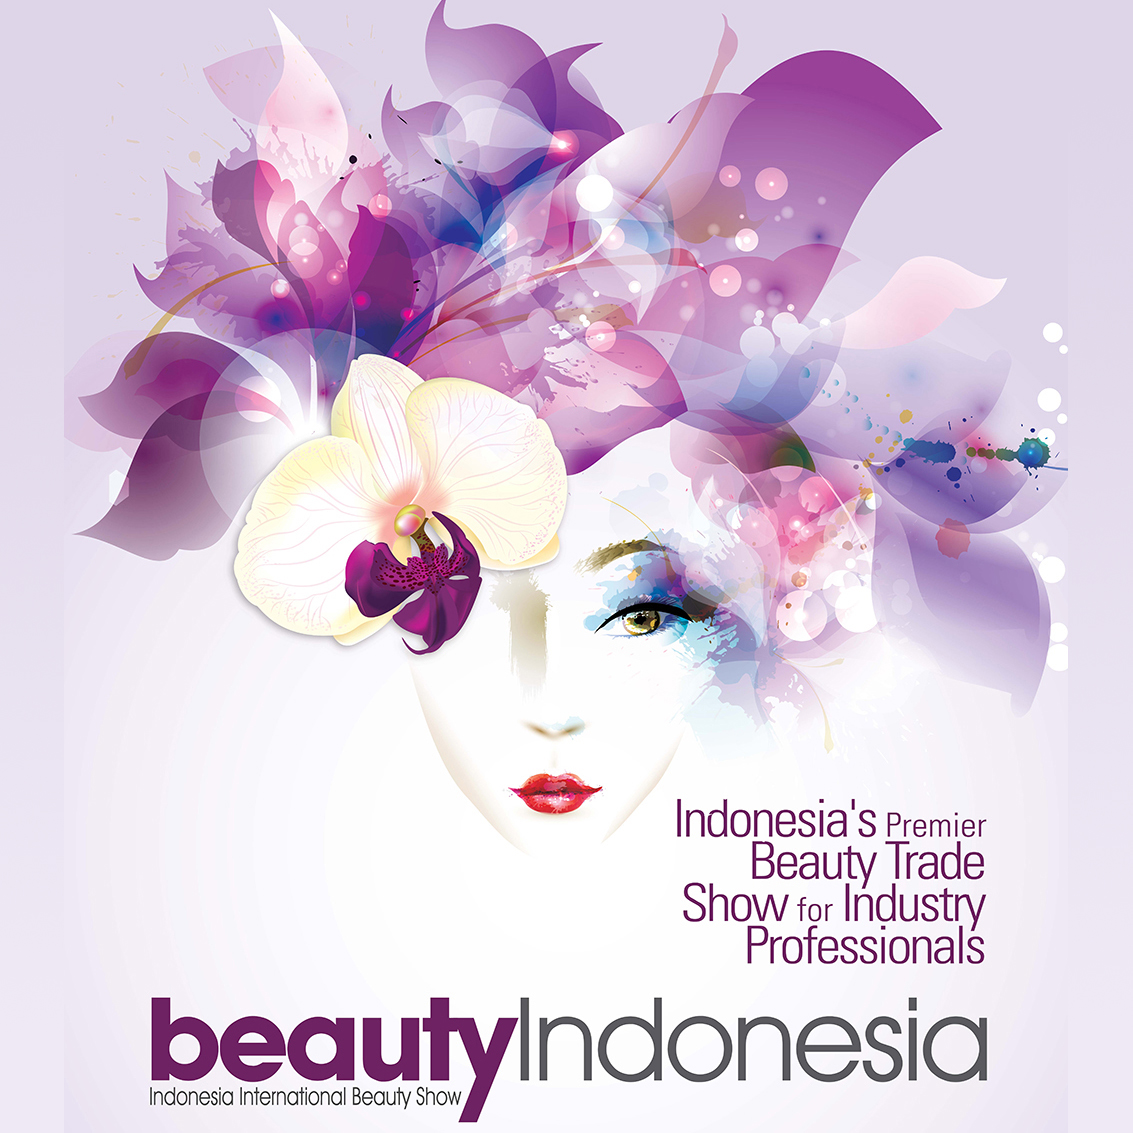 Beauty Indonesia is the first trade-only event in Indonesia representing all beauty sectors: ingredients, packaging & machinery, contract manufacturing, finished cosmetics, toiletries & personal care, wellness & spa, natural health, beauty salons, professional hair, nail and accessories.
Part of the global UBM's beauty event series.